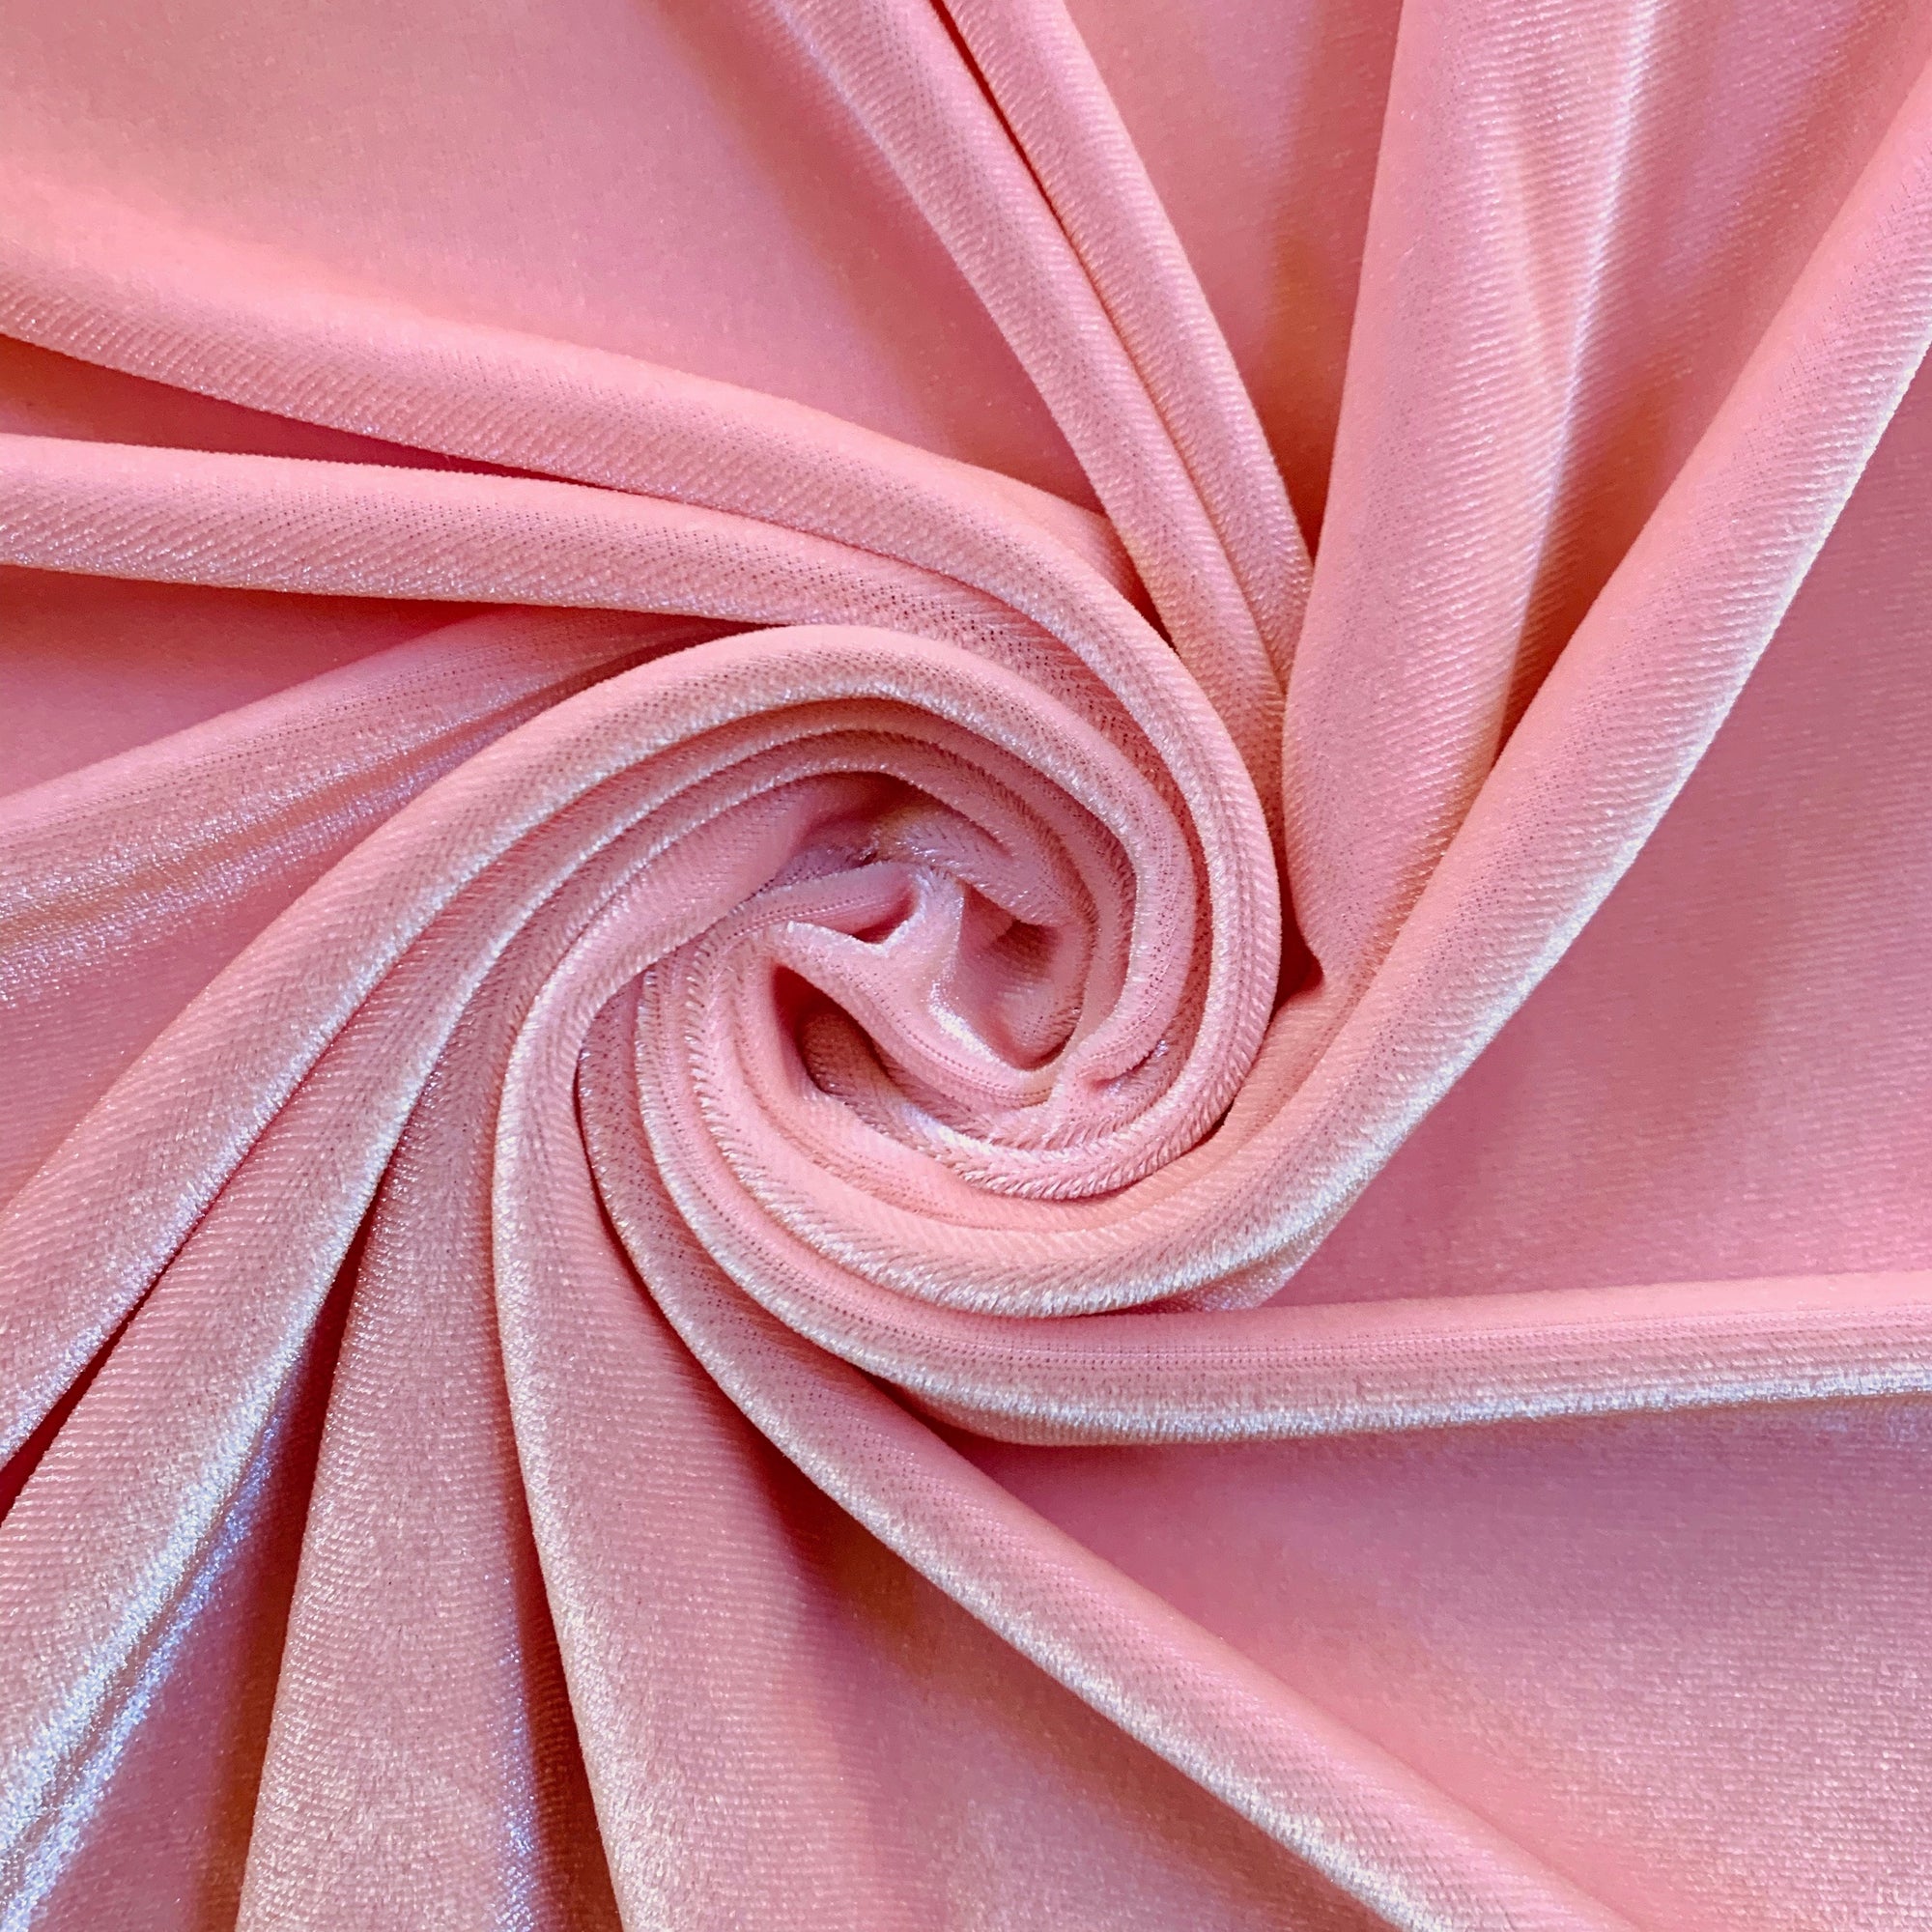 Princess LIGHT PINK Polyester Stretch Velvet Fabric for Bows, Top Knots, Head Wraps, Scrunchies, Clothes, Costumes, Crafts